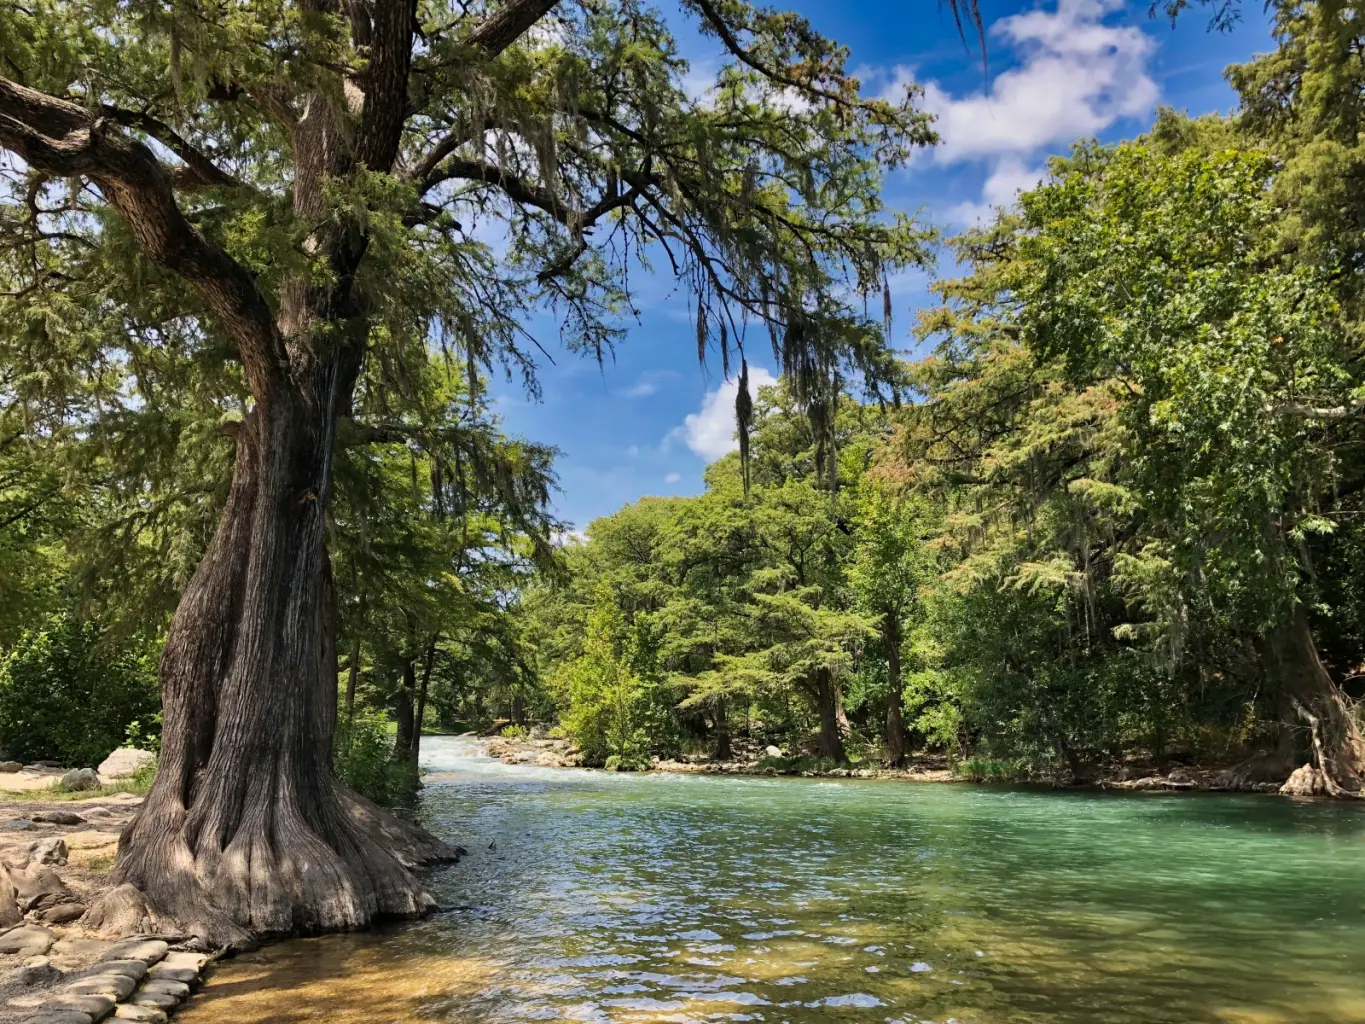 What to do in Gruene Texas